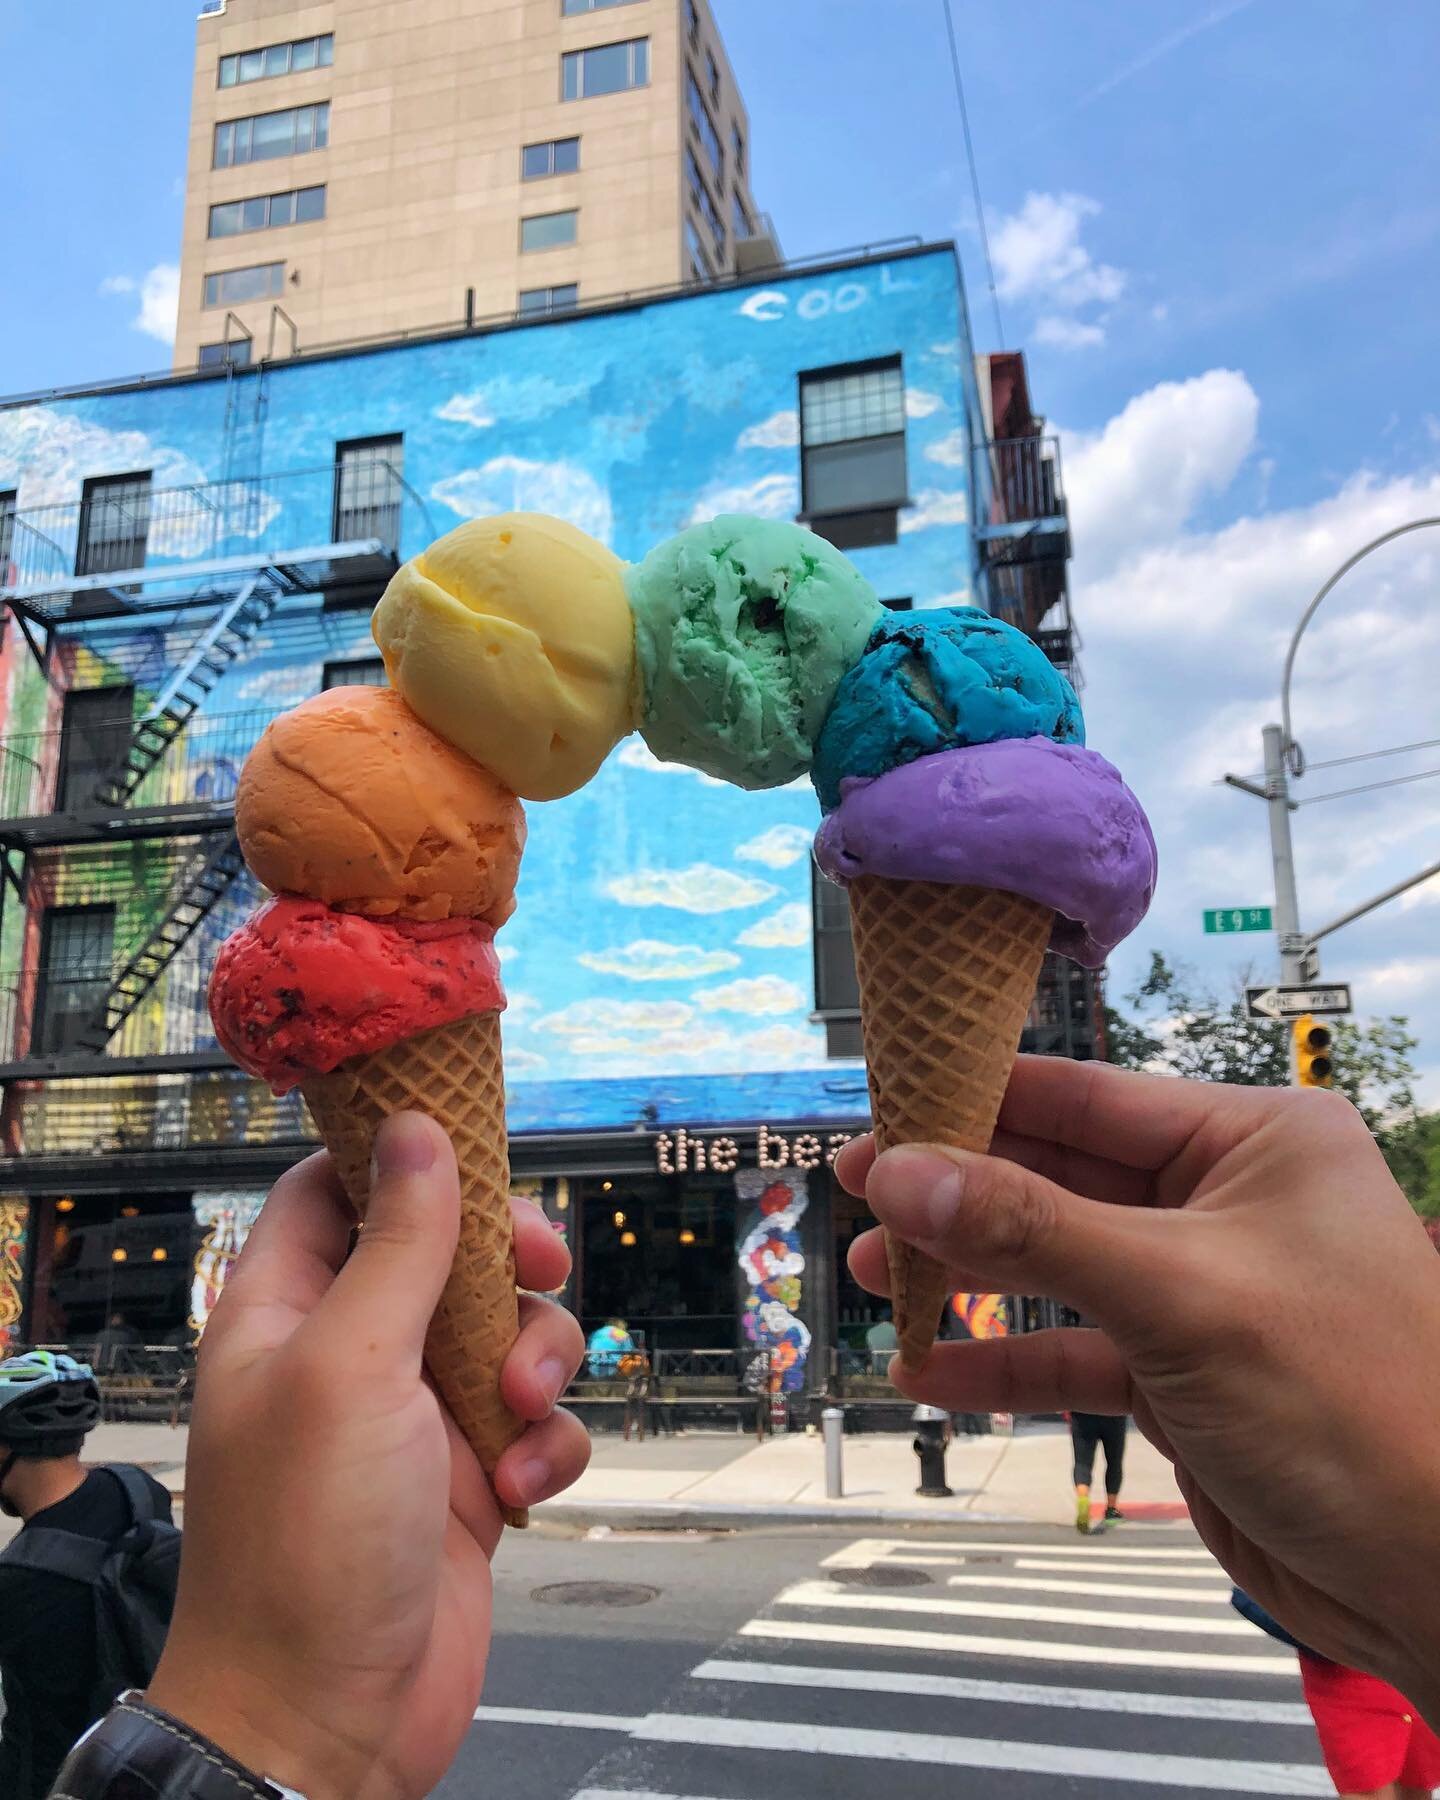 Definitely still one of our favorite picture 😍🌈
.
.

#stuffedicecream #Stuffed #icecream #nyc #nycvibes #dessert #icecreambouquet #stuffedbouquet #bouquet #heresmyfood #yougottaeatthis #buzzfeedfood #treatyoself #eatfamous #eaterny #tryitordiet #sp